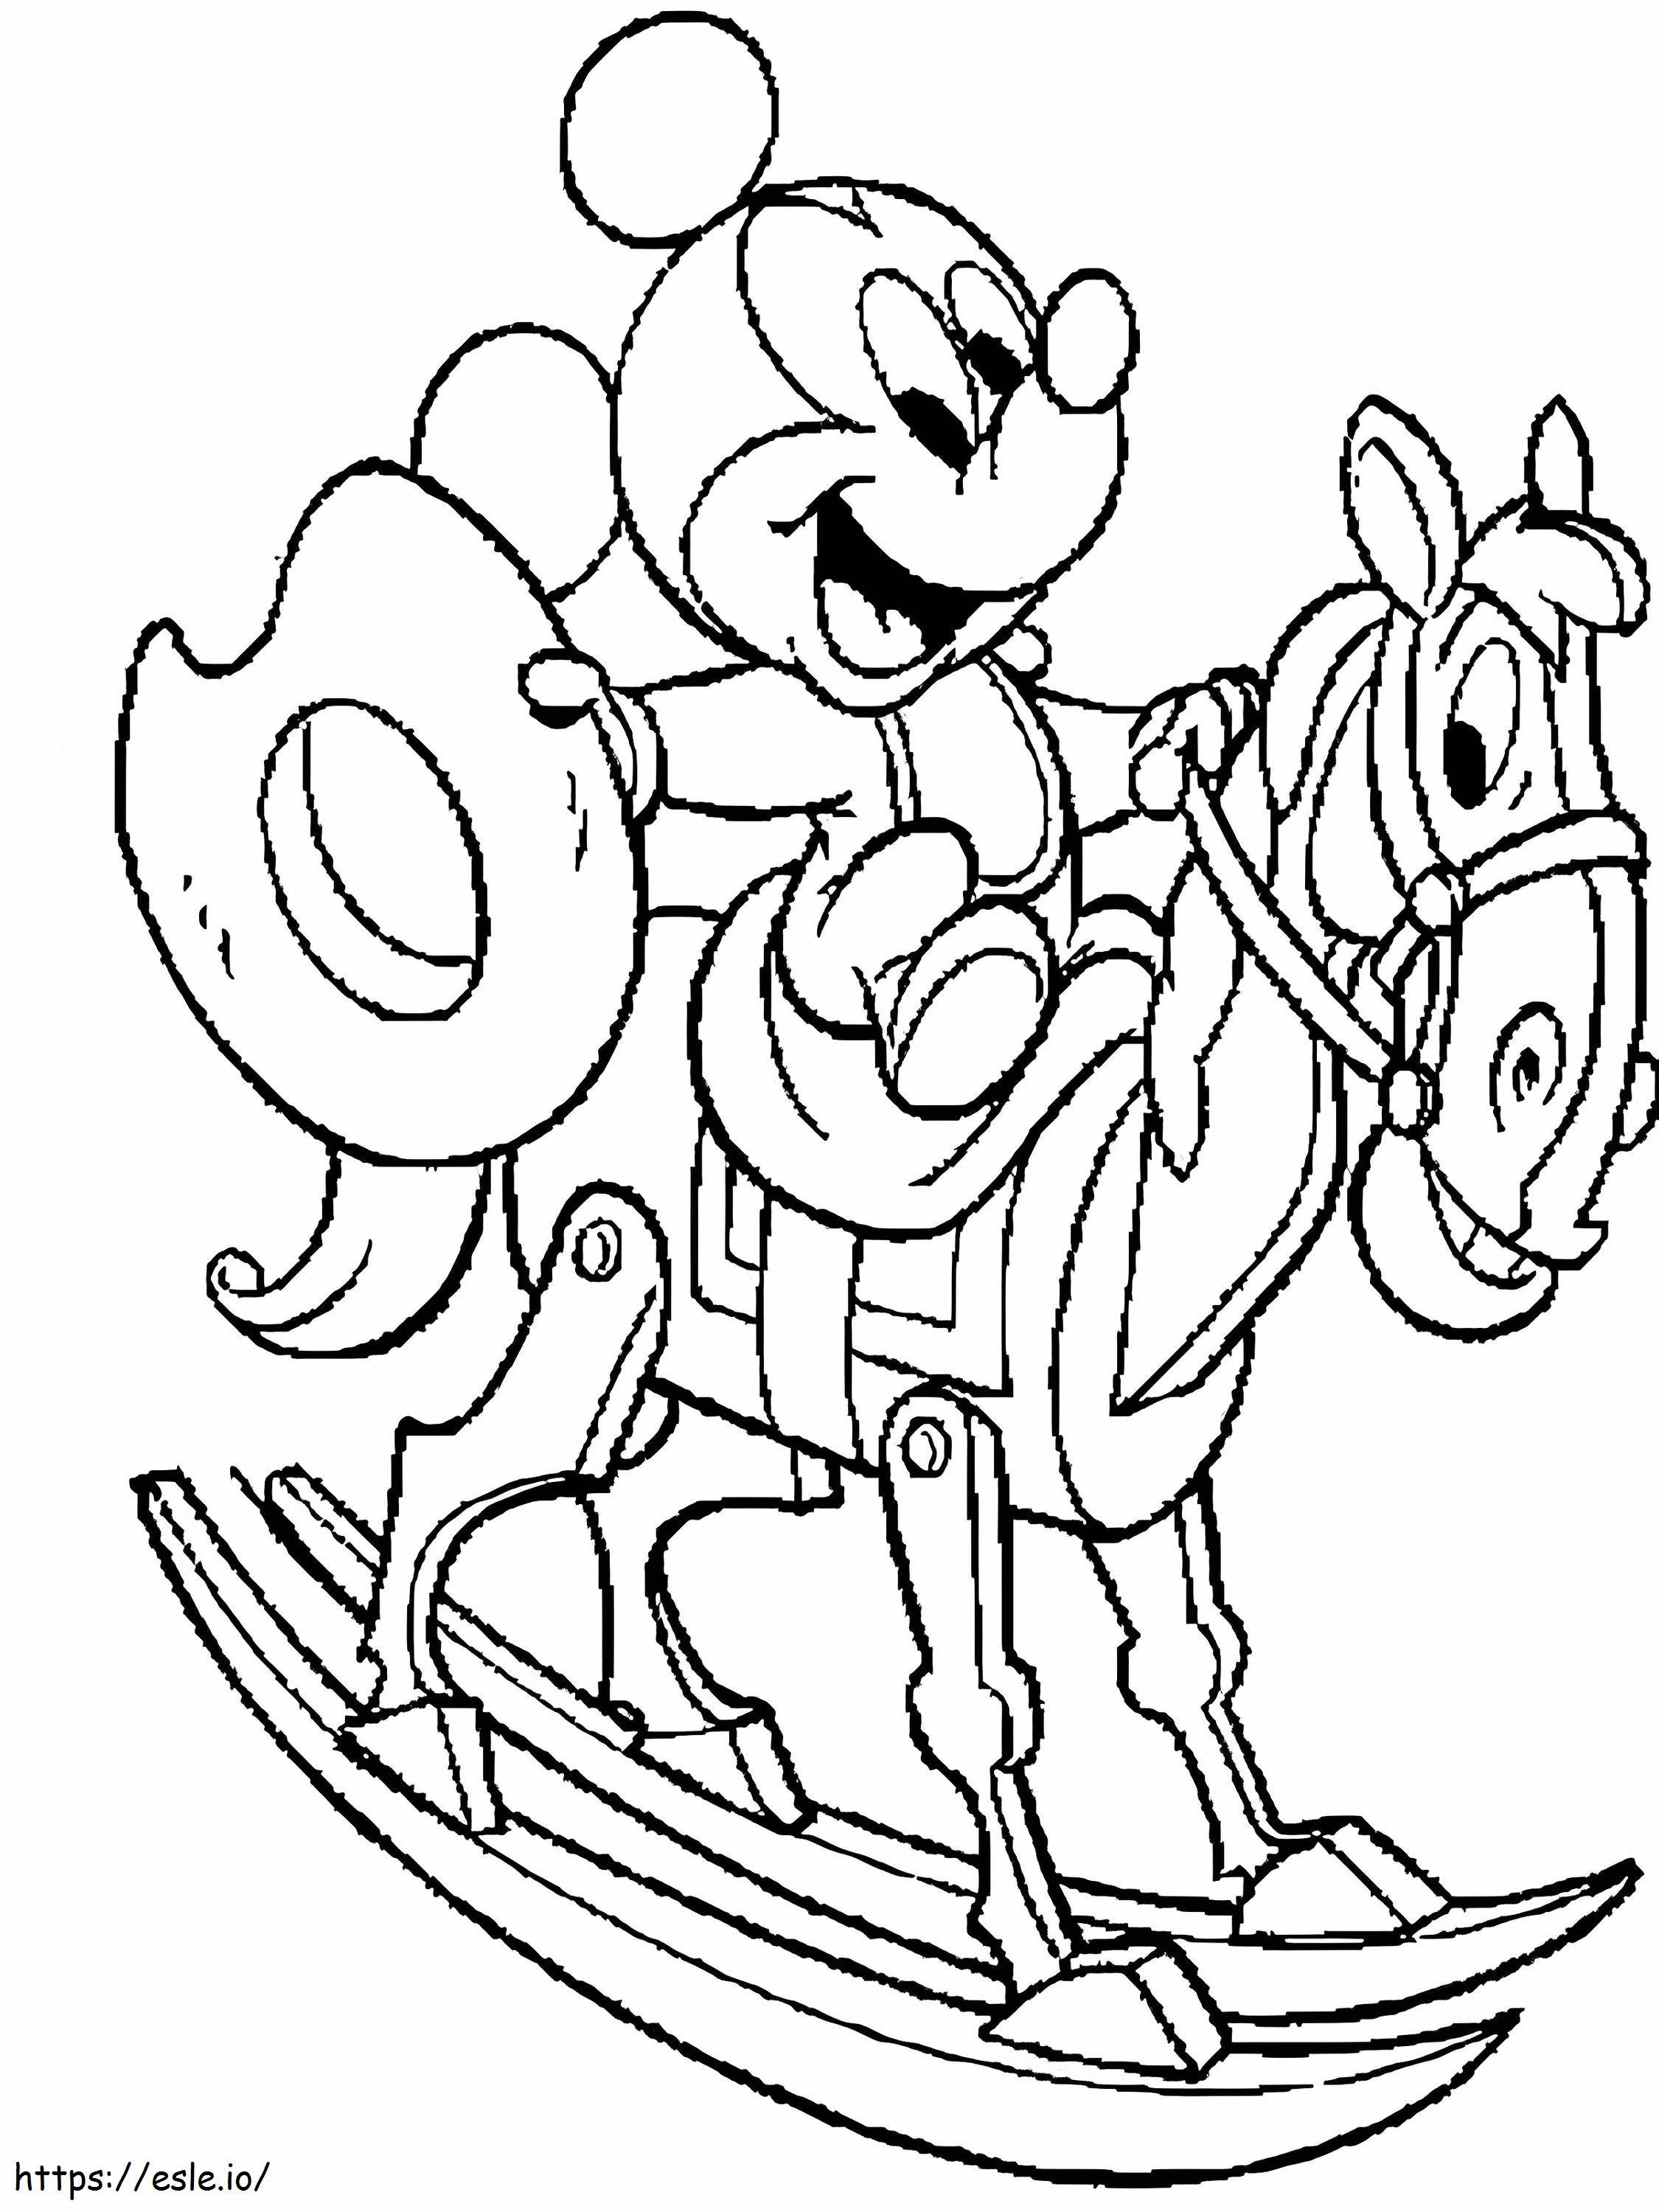 Cute Baby Mickey 1 coloring page